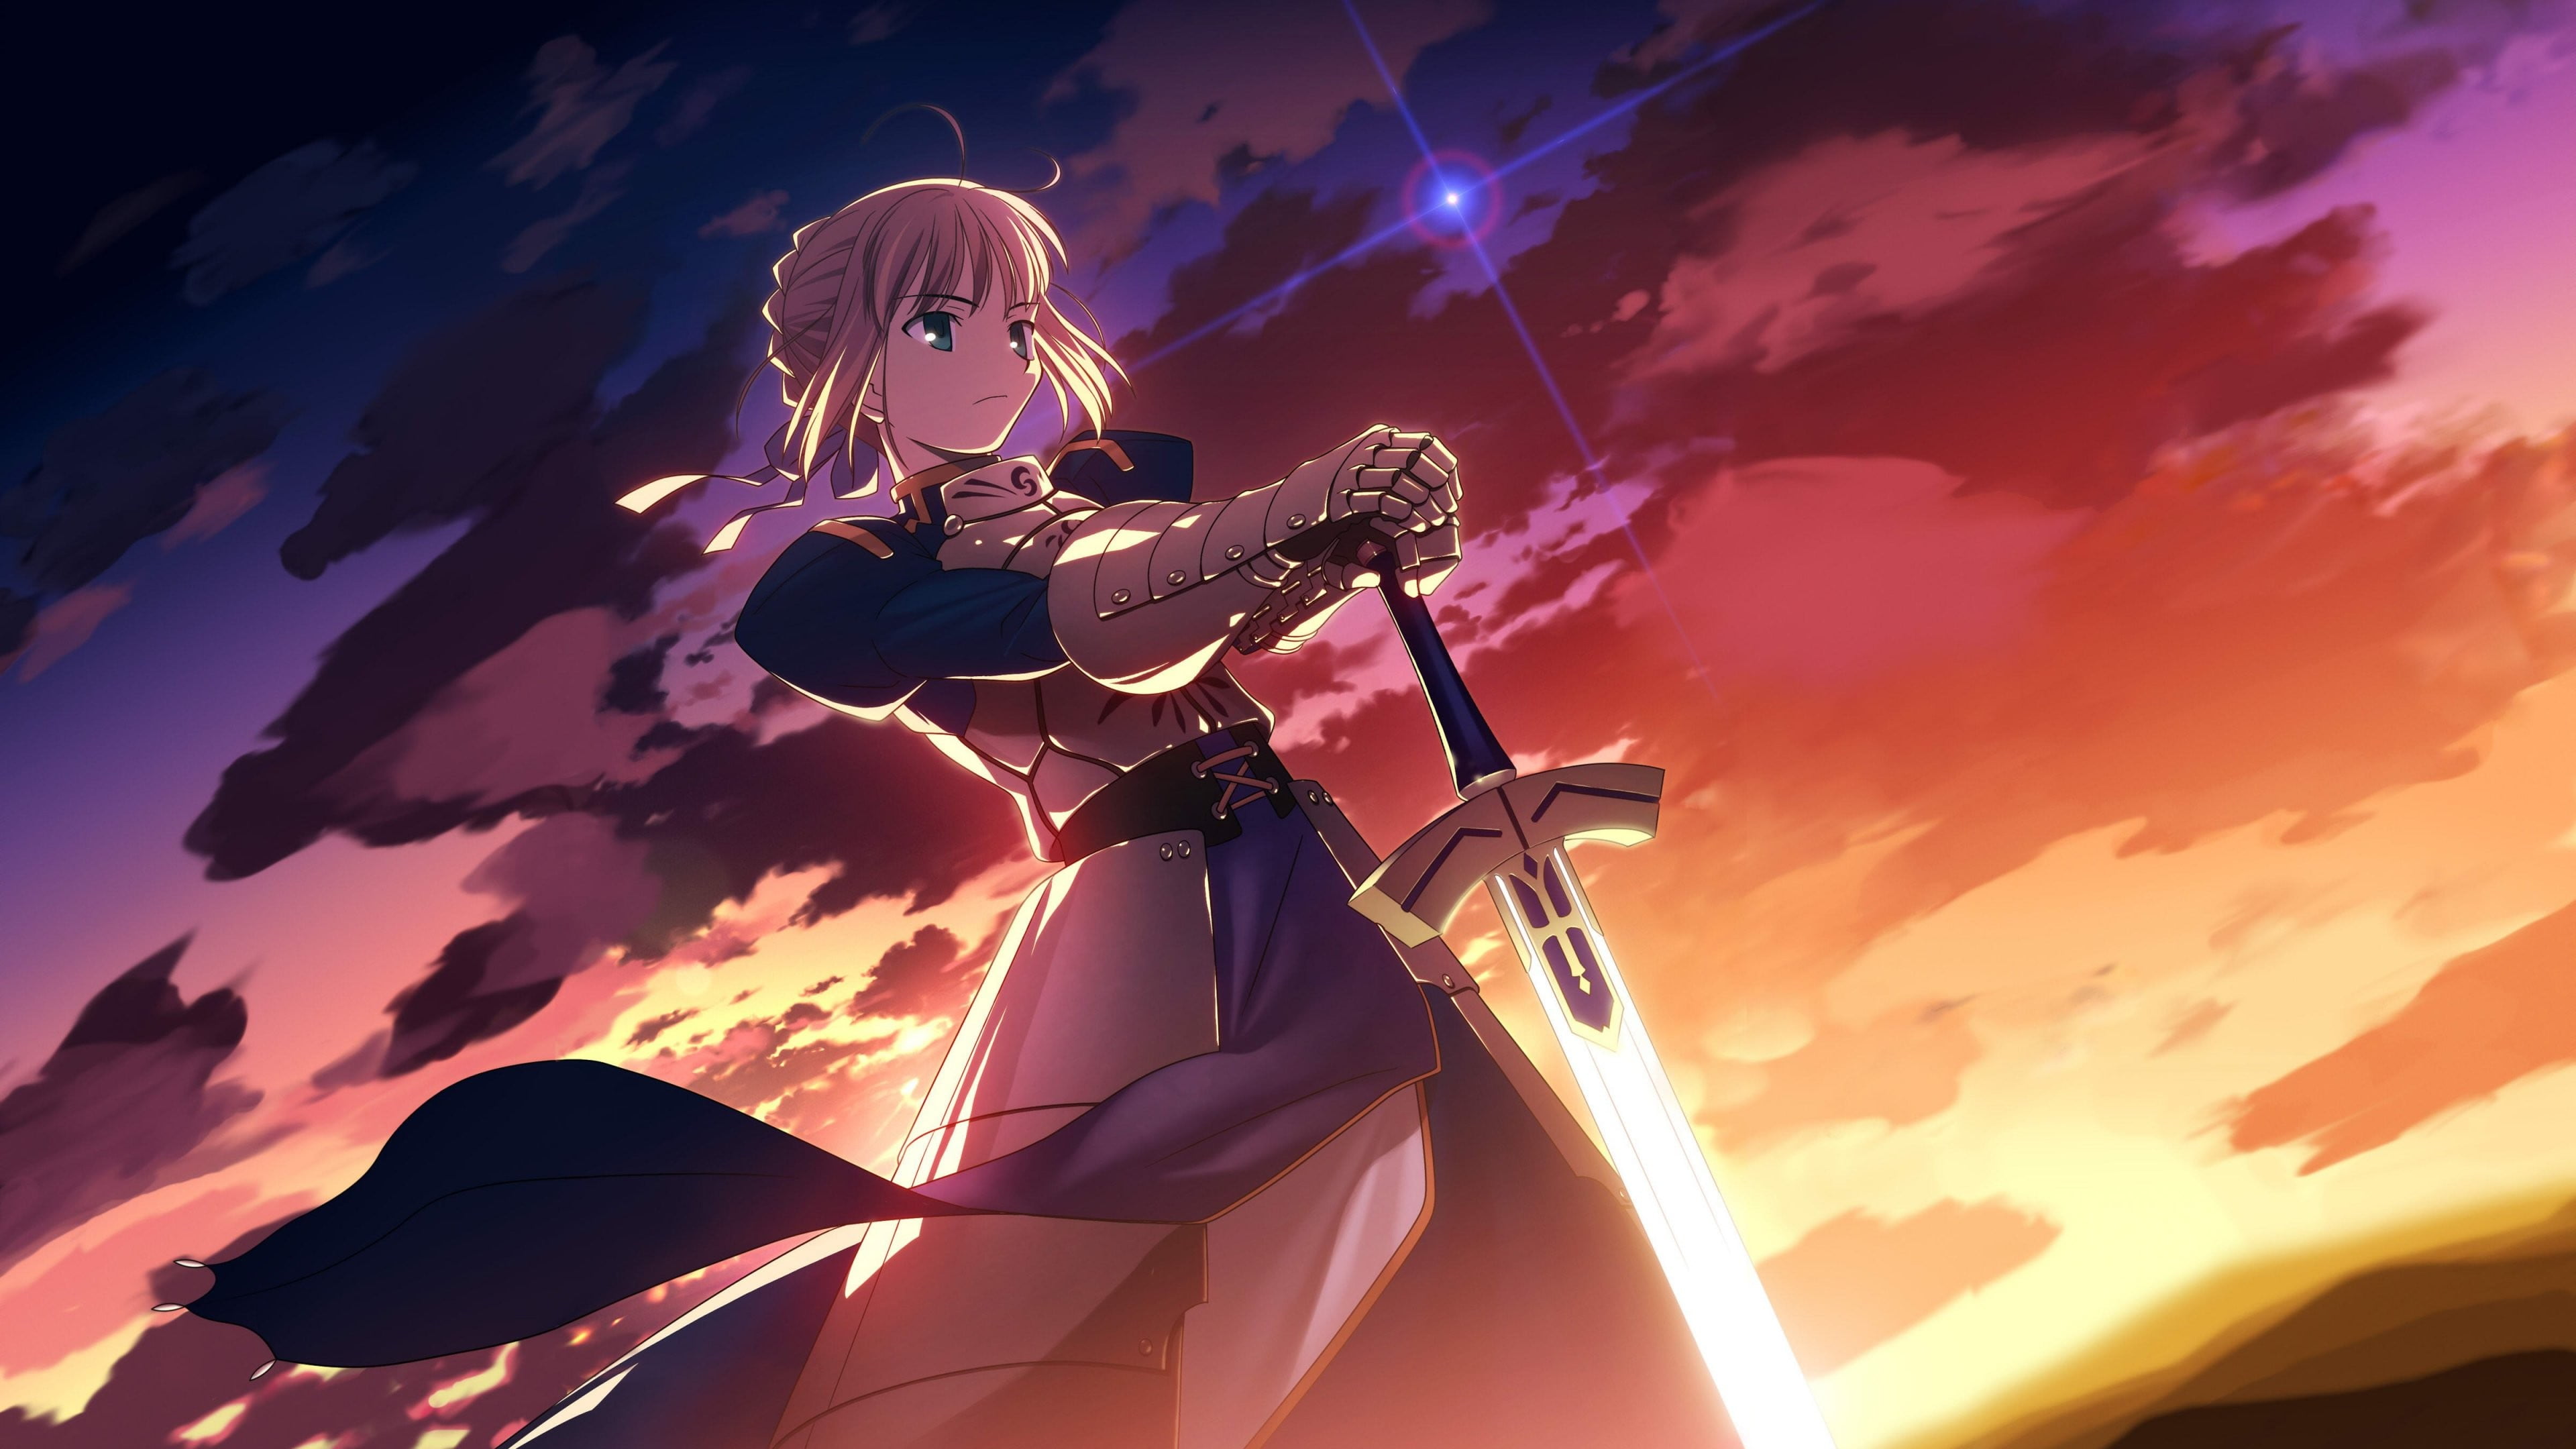 1. Saber from Fate/stay night - wide 7